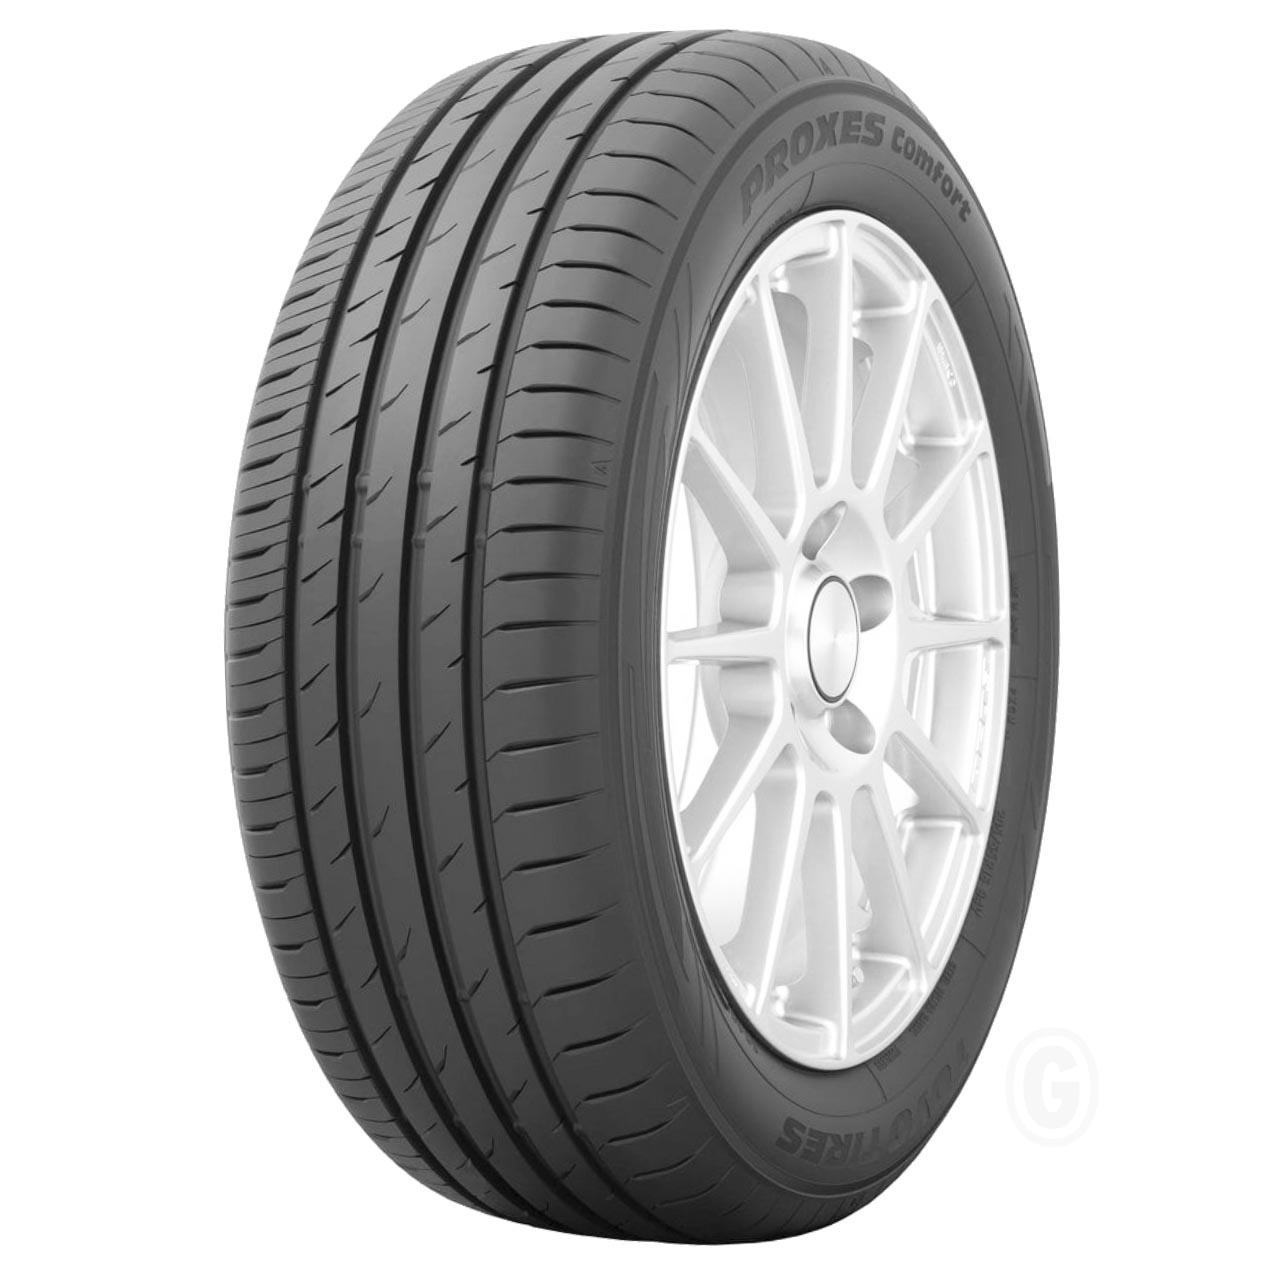 Toyo Proxes Comfort 225/50R18 95W